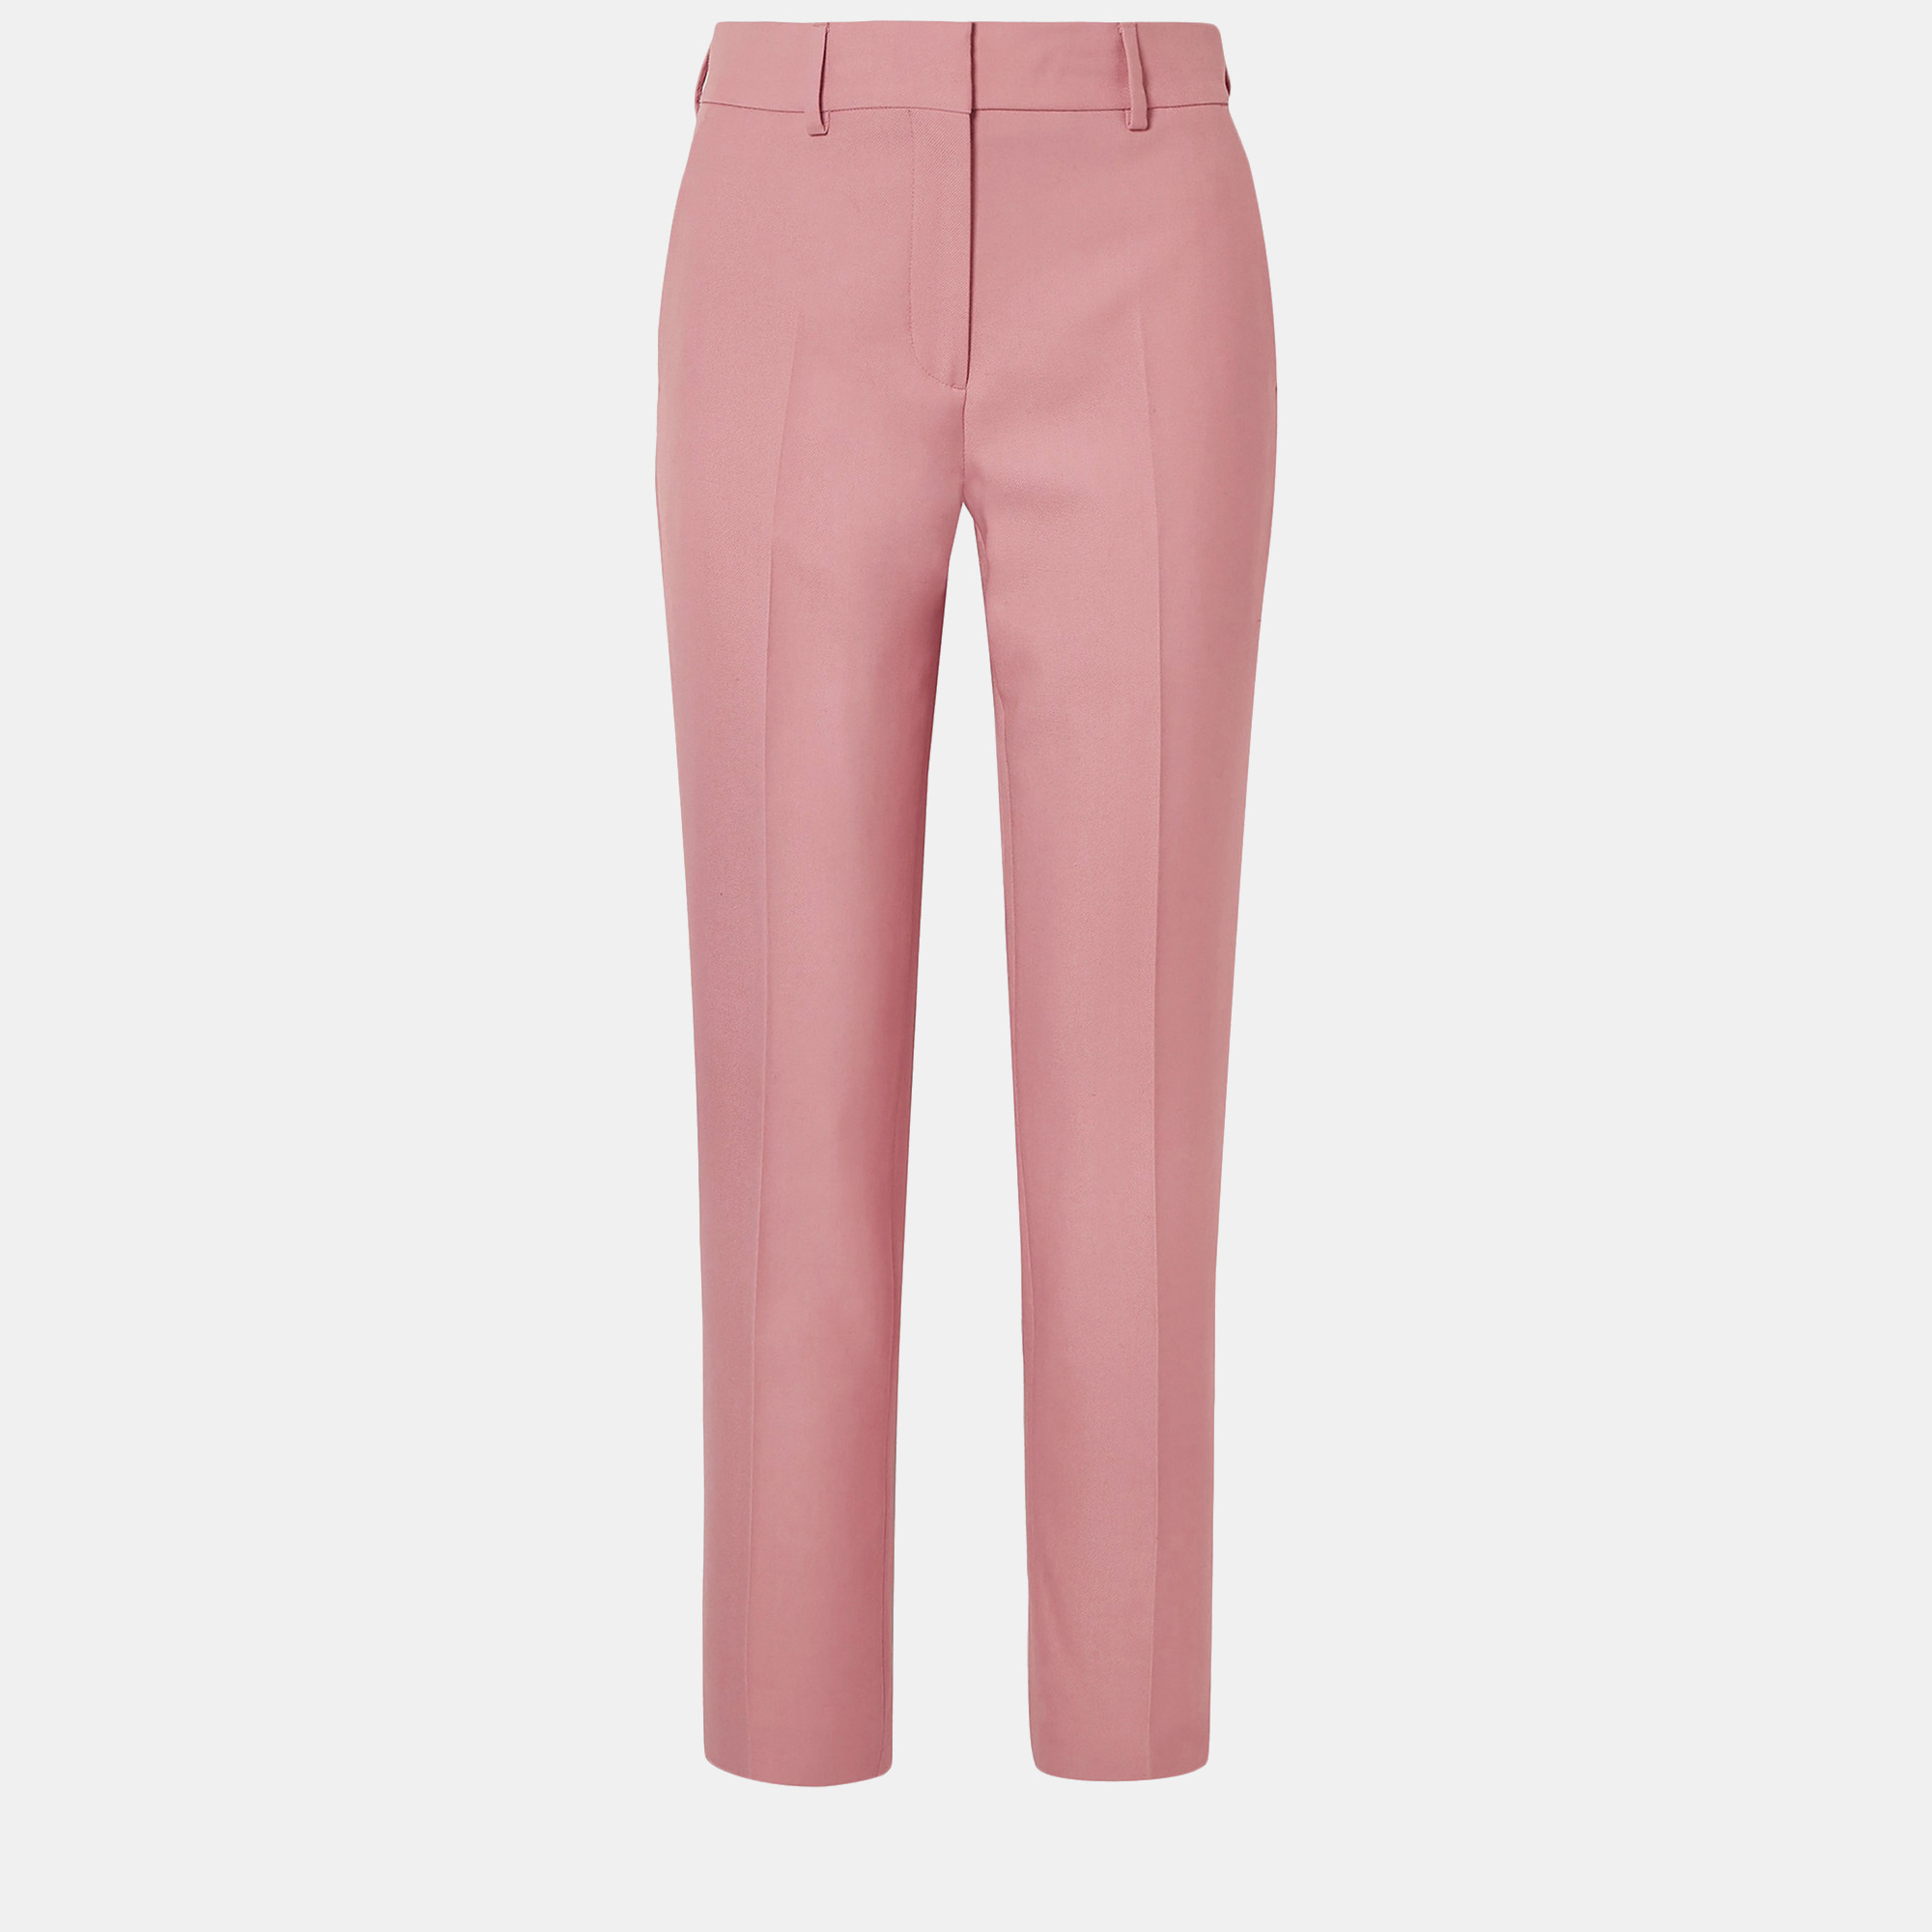 Pre-owned Burberry Pink Wool-blend Straight Leg Pants S (uk 6)